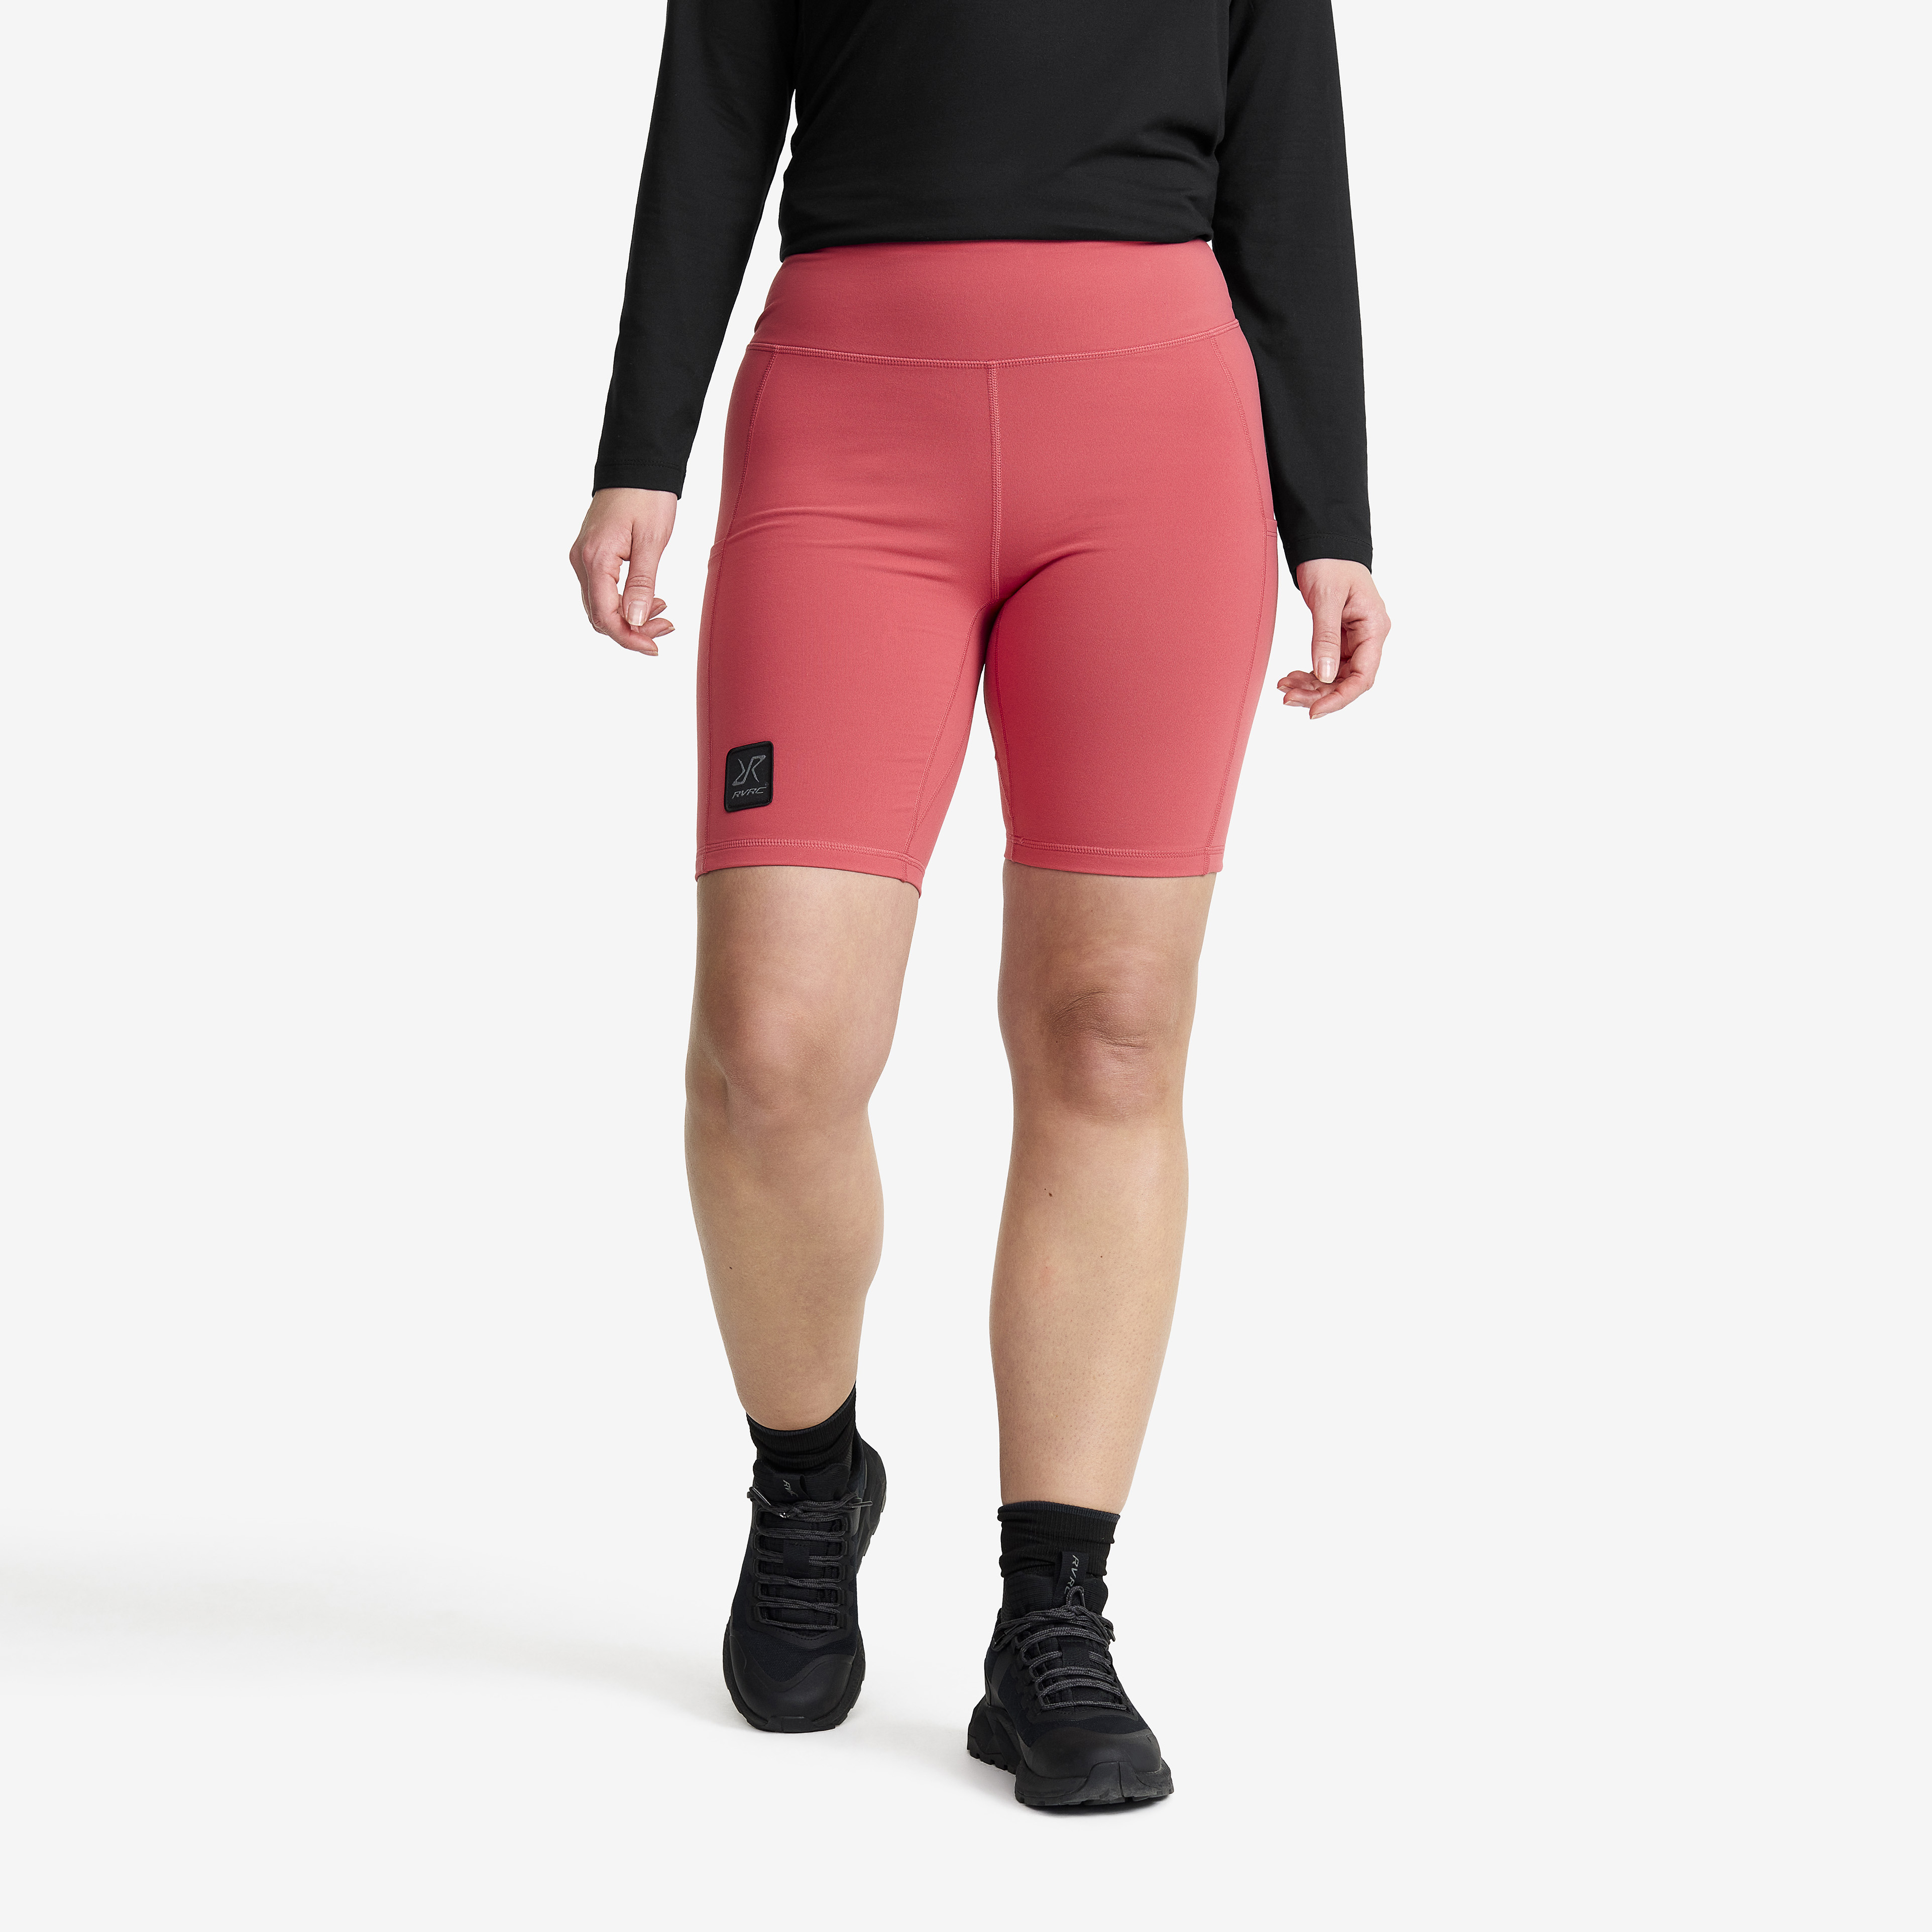 Summit Short Tights Holly Berry Femme